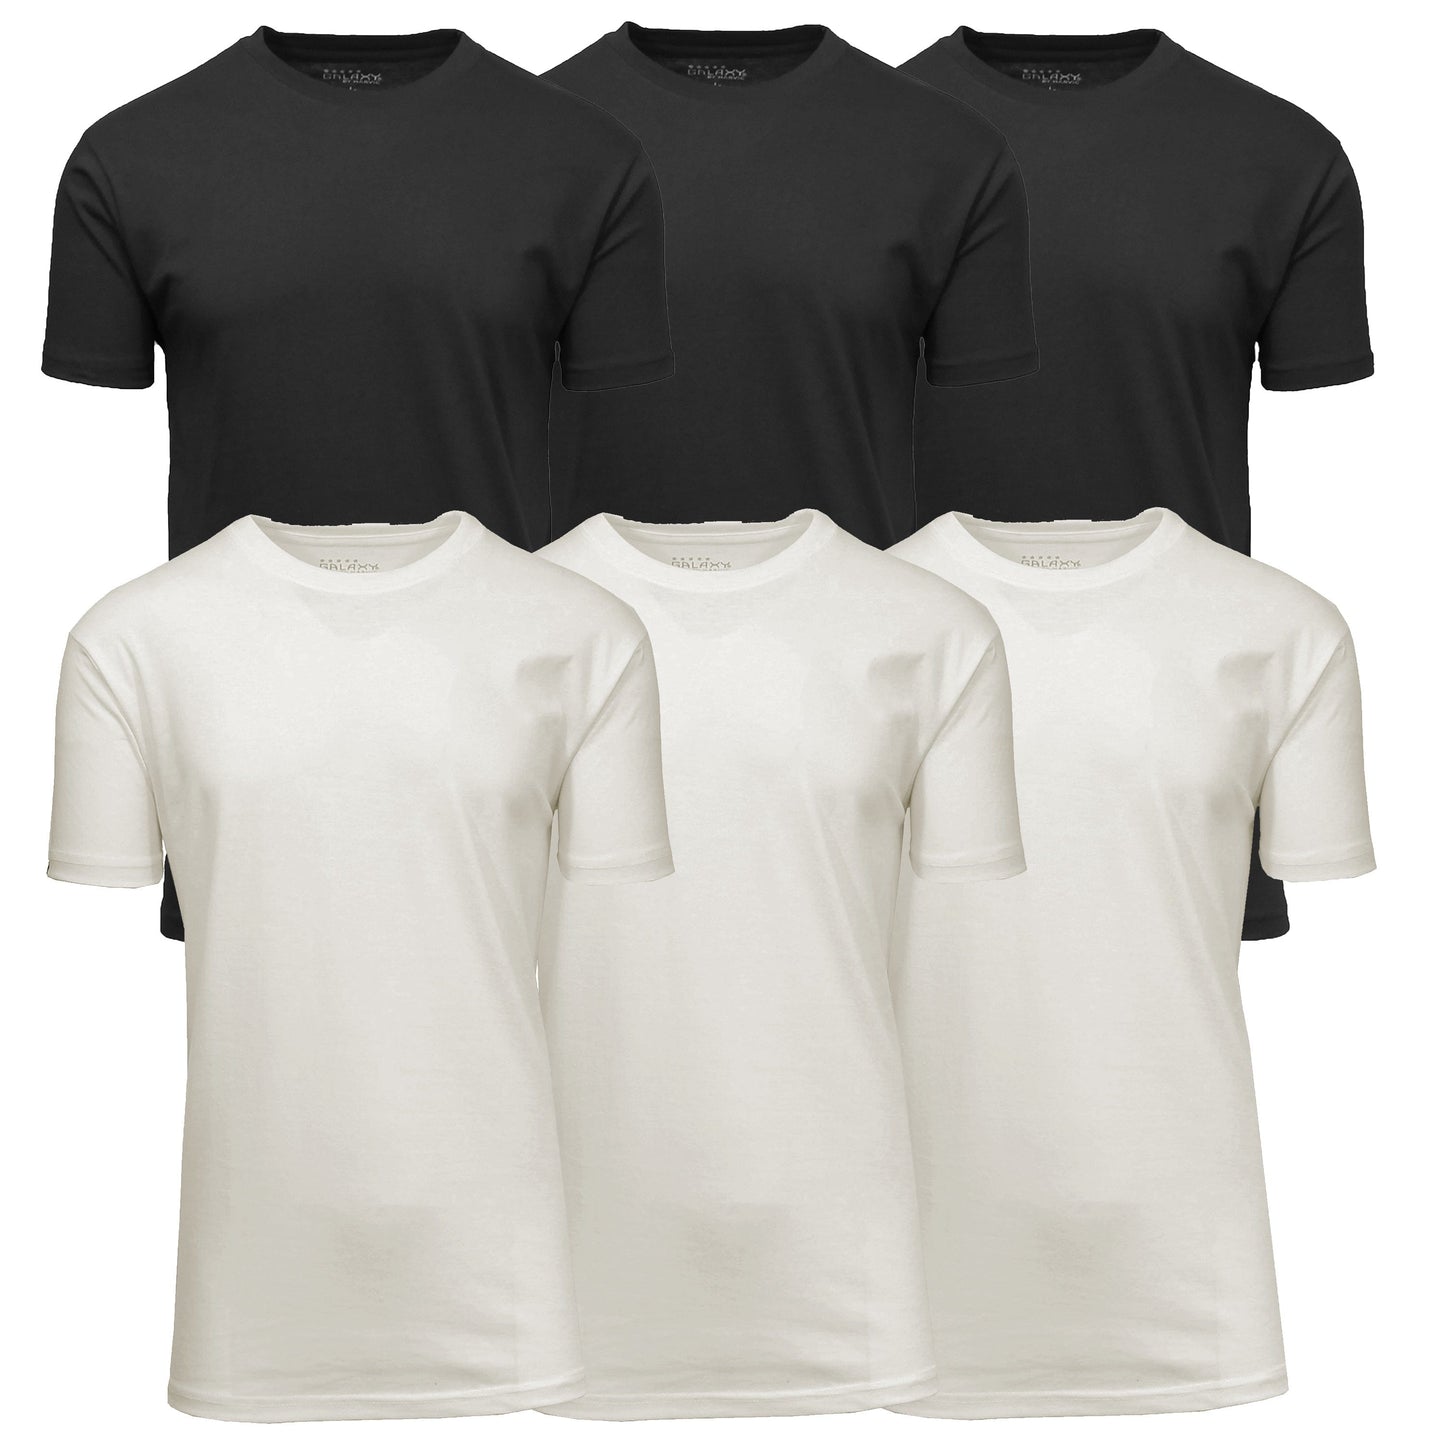 (6-Pack) Short Sleeve Crew-Neck Modern Fit Classic Tees (S-3XL) - GalaxybyHarvic